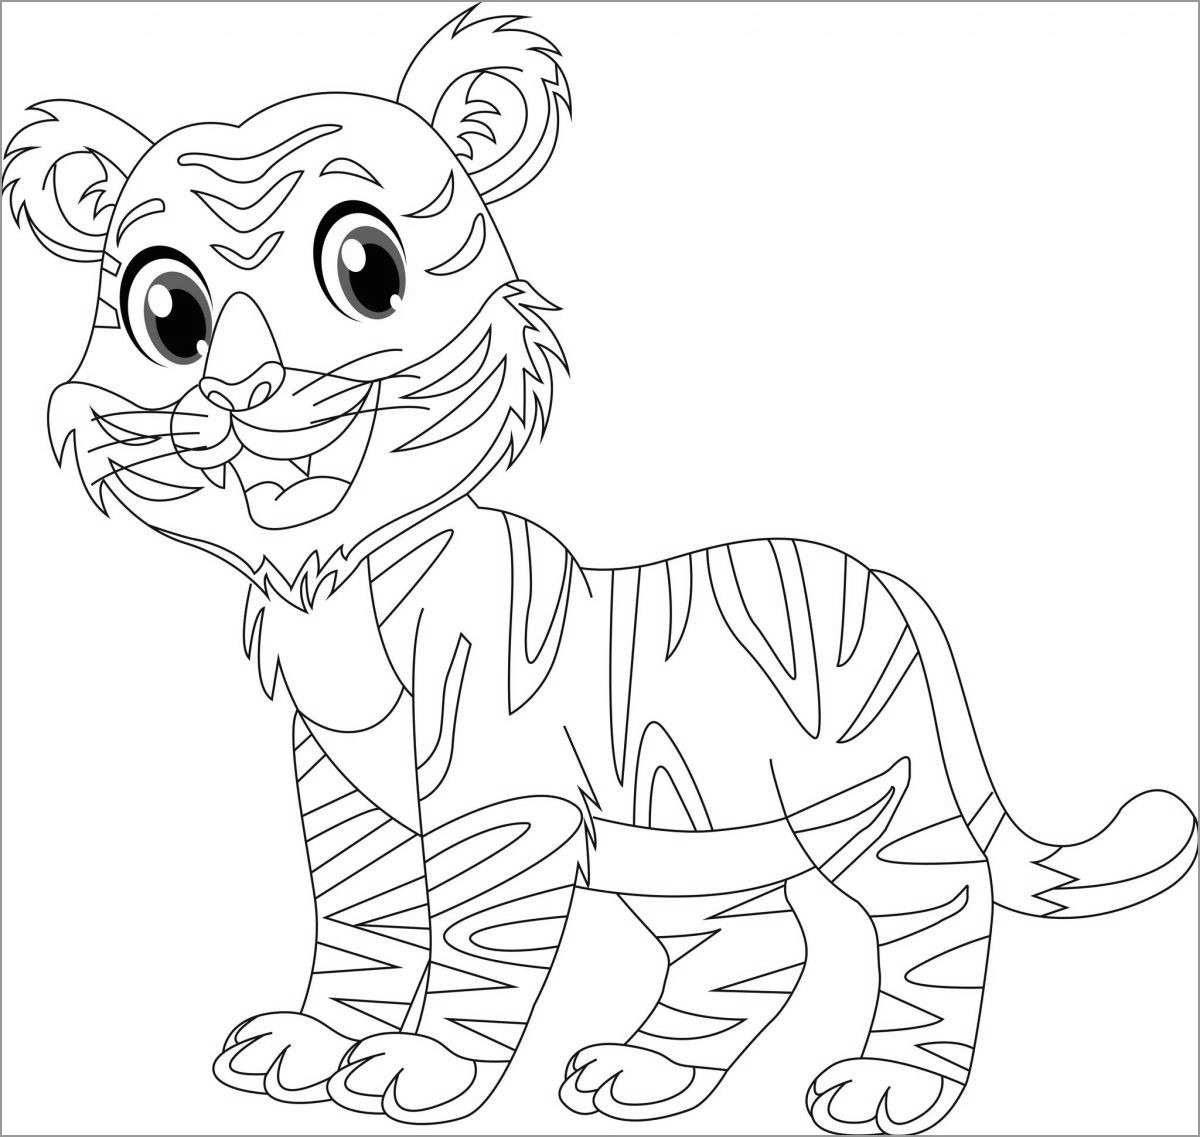 Tiger Coloring Pages - ColoringBay